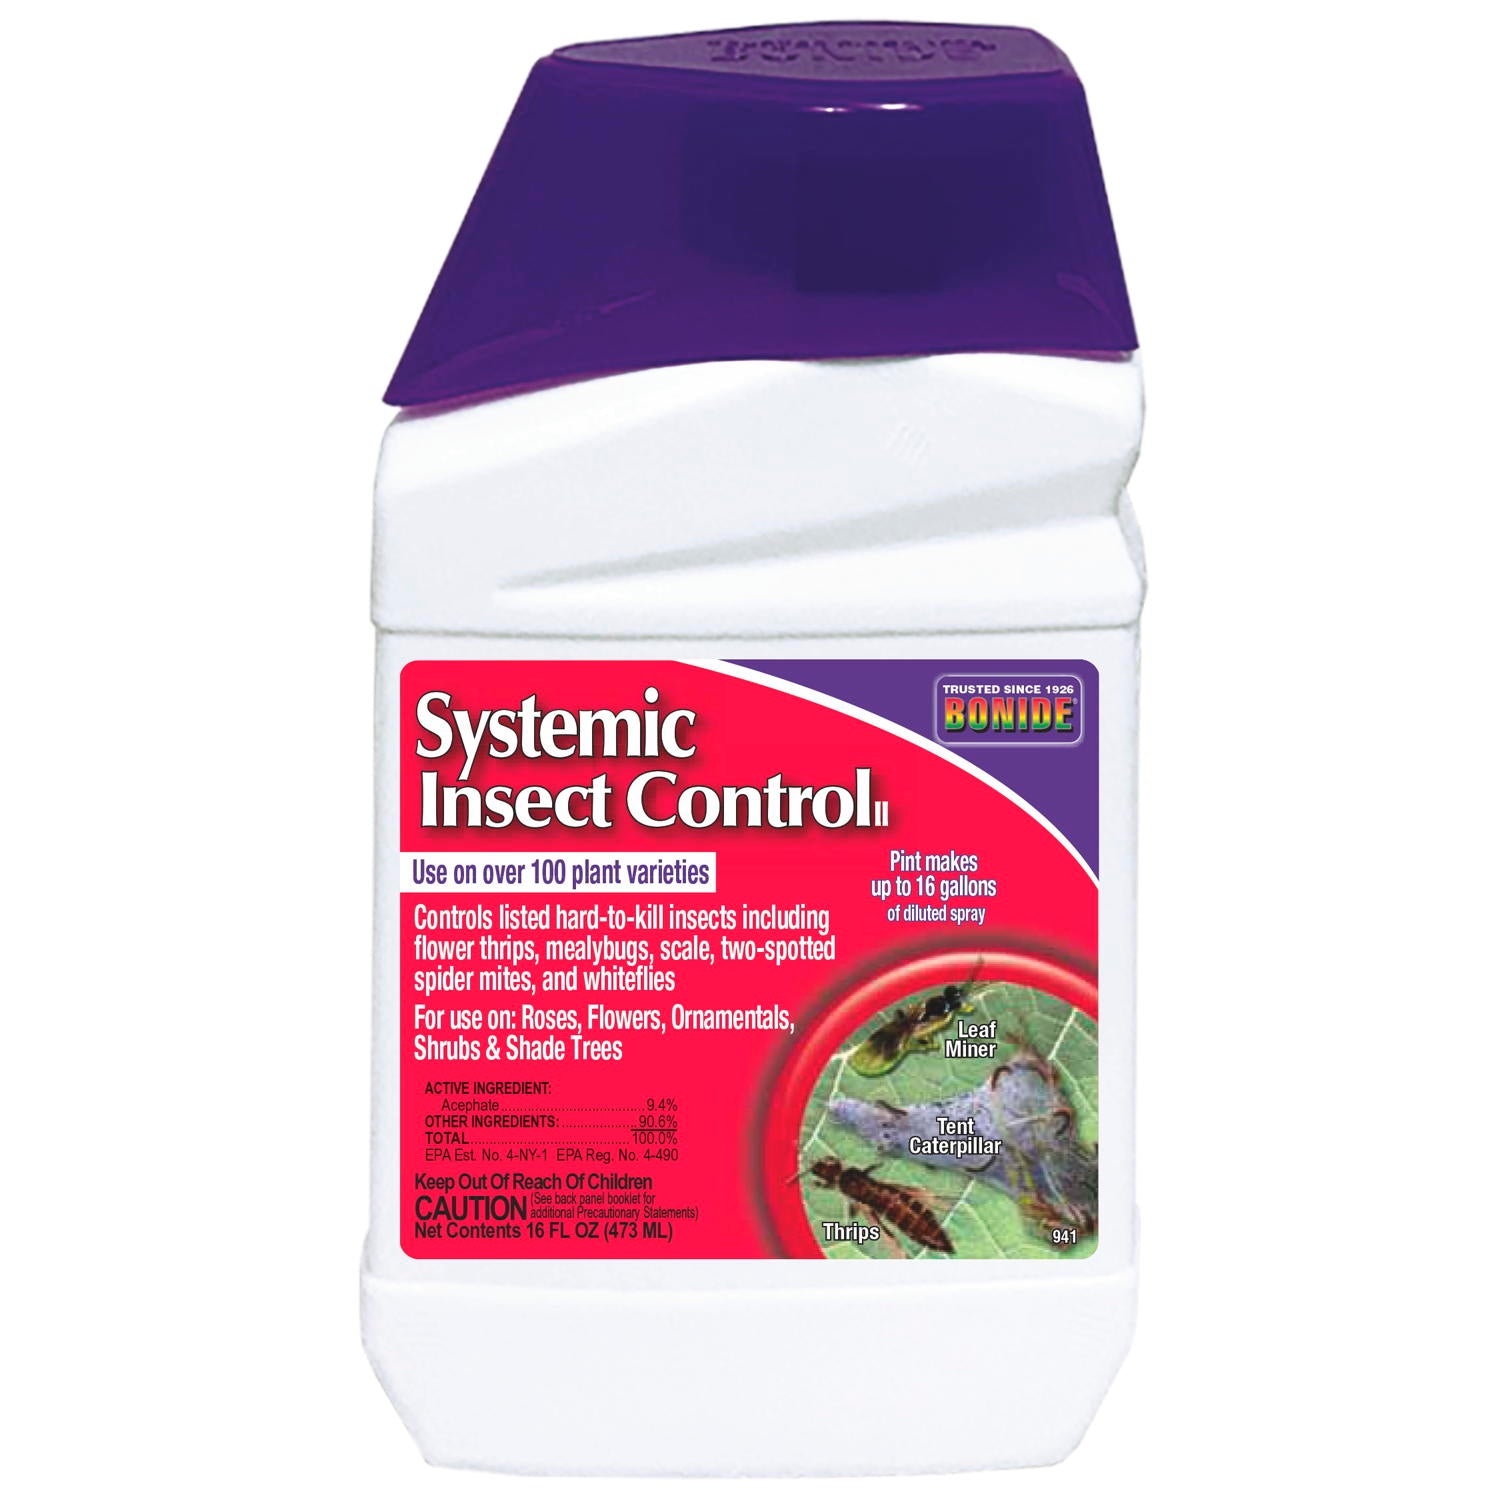 Systemic spray for trees and shrubs that treats bagworms, thrips, spider mites and more